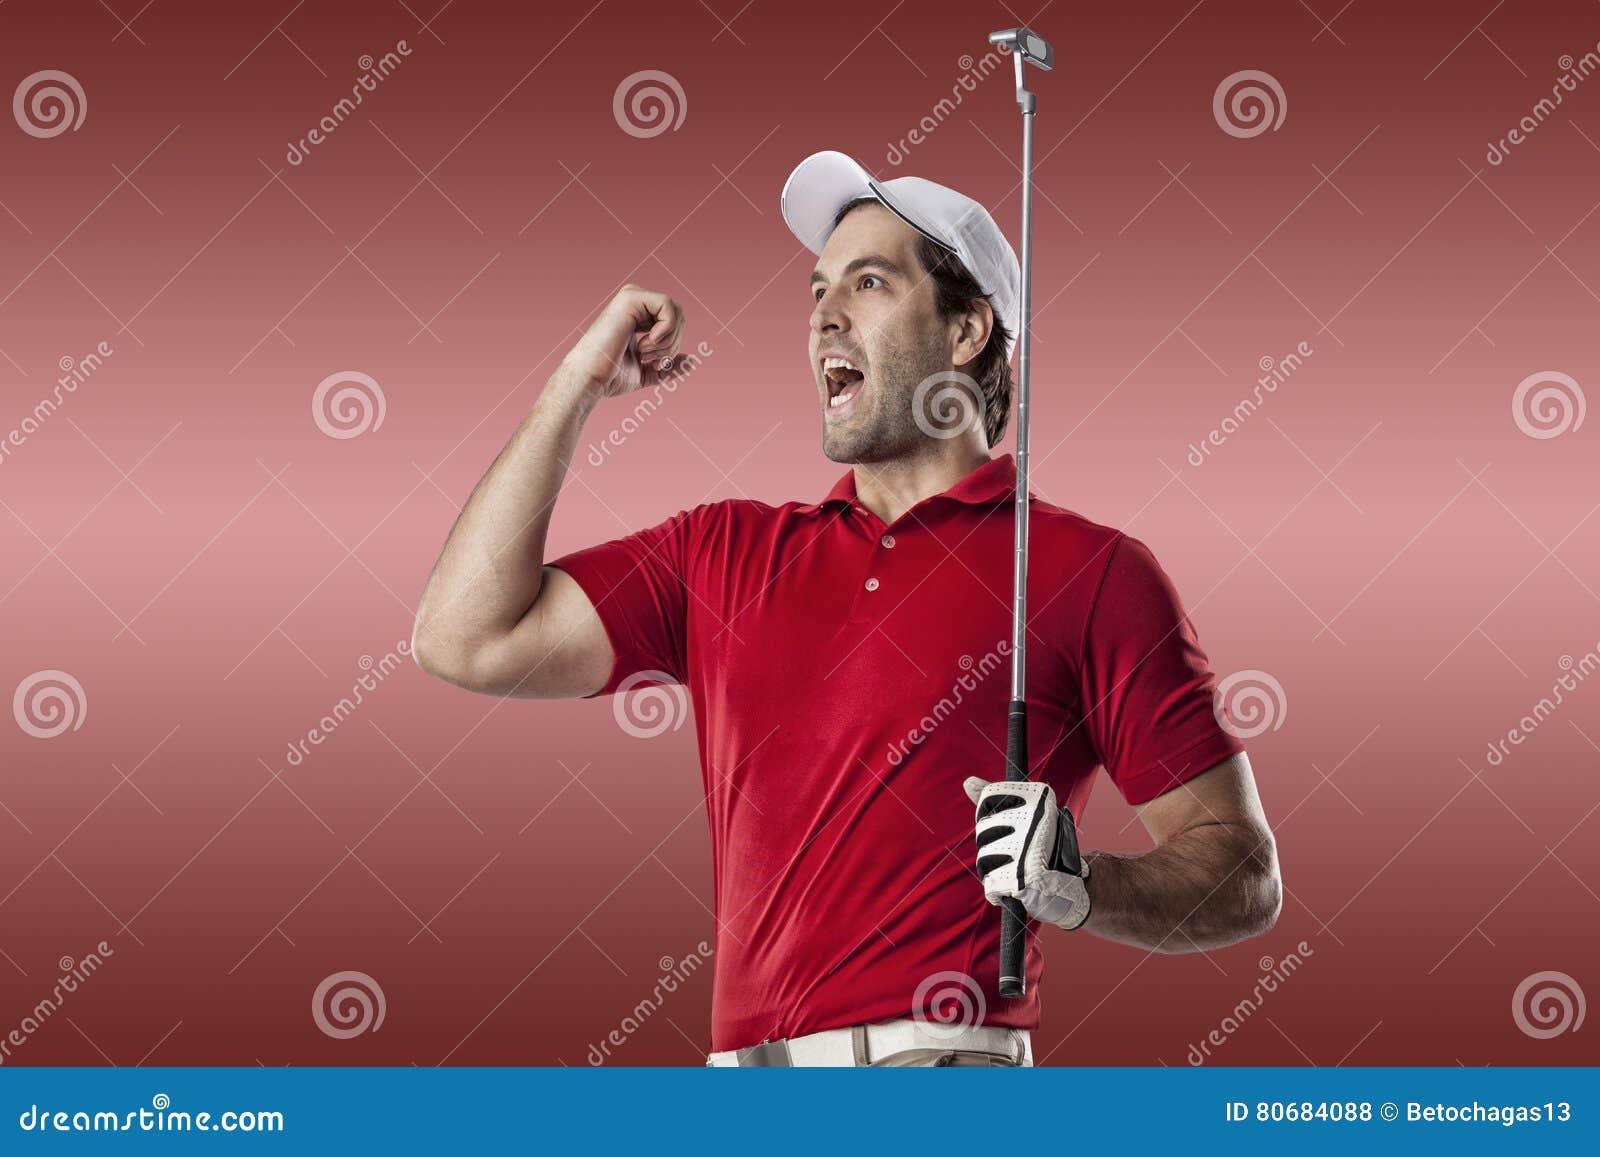 Golf Player stock photo. Image of golfing, professional - 80684088